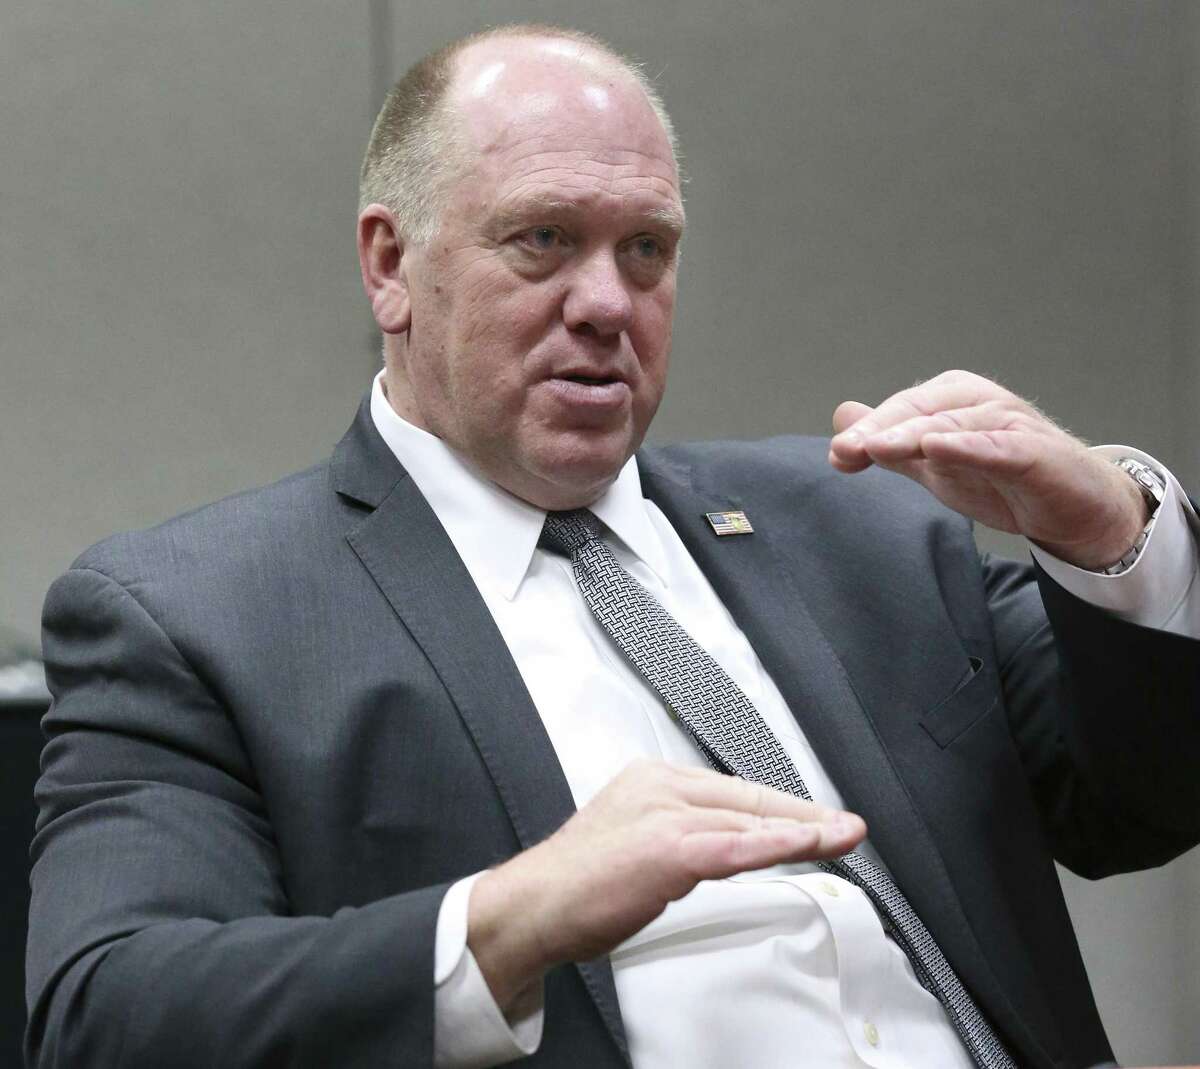 ICE Acting Director Thomas Homan answers questions during the Border Security Expo at the Henry B. Gonzalez Covention Center on January 31, 2018.